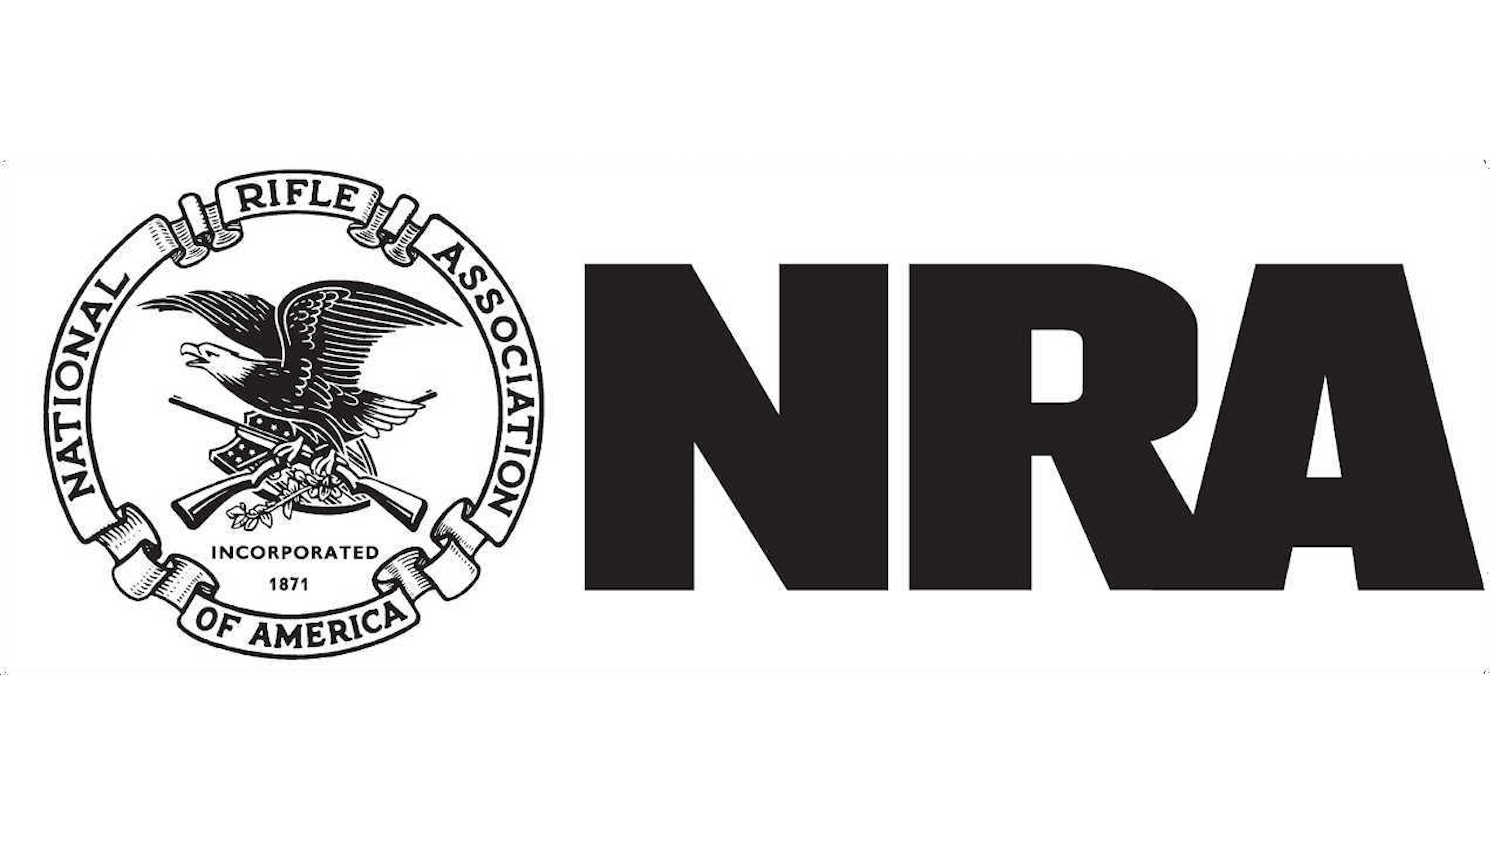 NRA Announces Sponsors for the Inaugural Personal Protection Expo in Milwaukee August 25-27, 2017